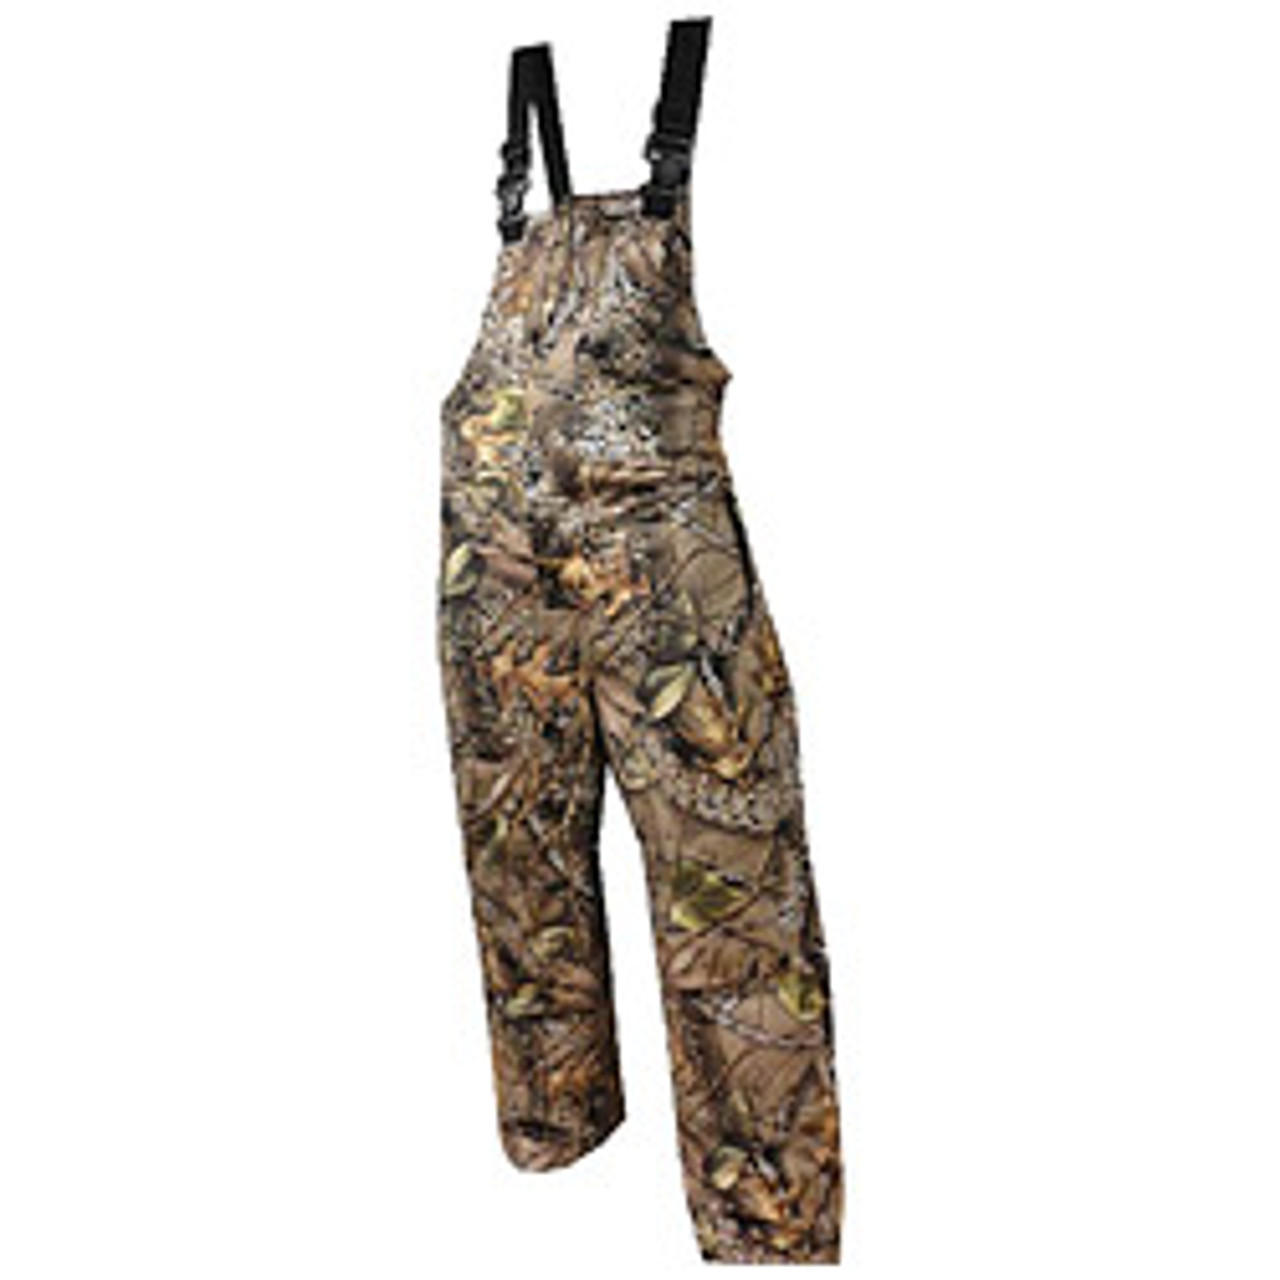 Camouflage Insulated Hunting Suit For Men, Women, And Kids Ghillie